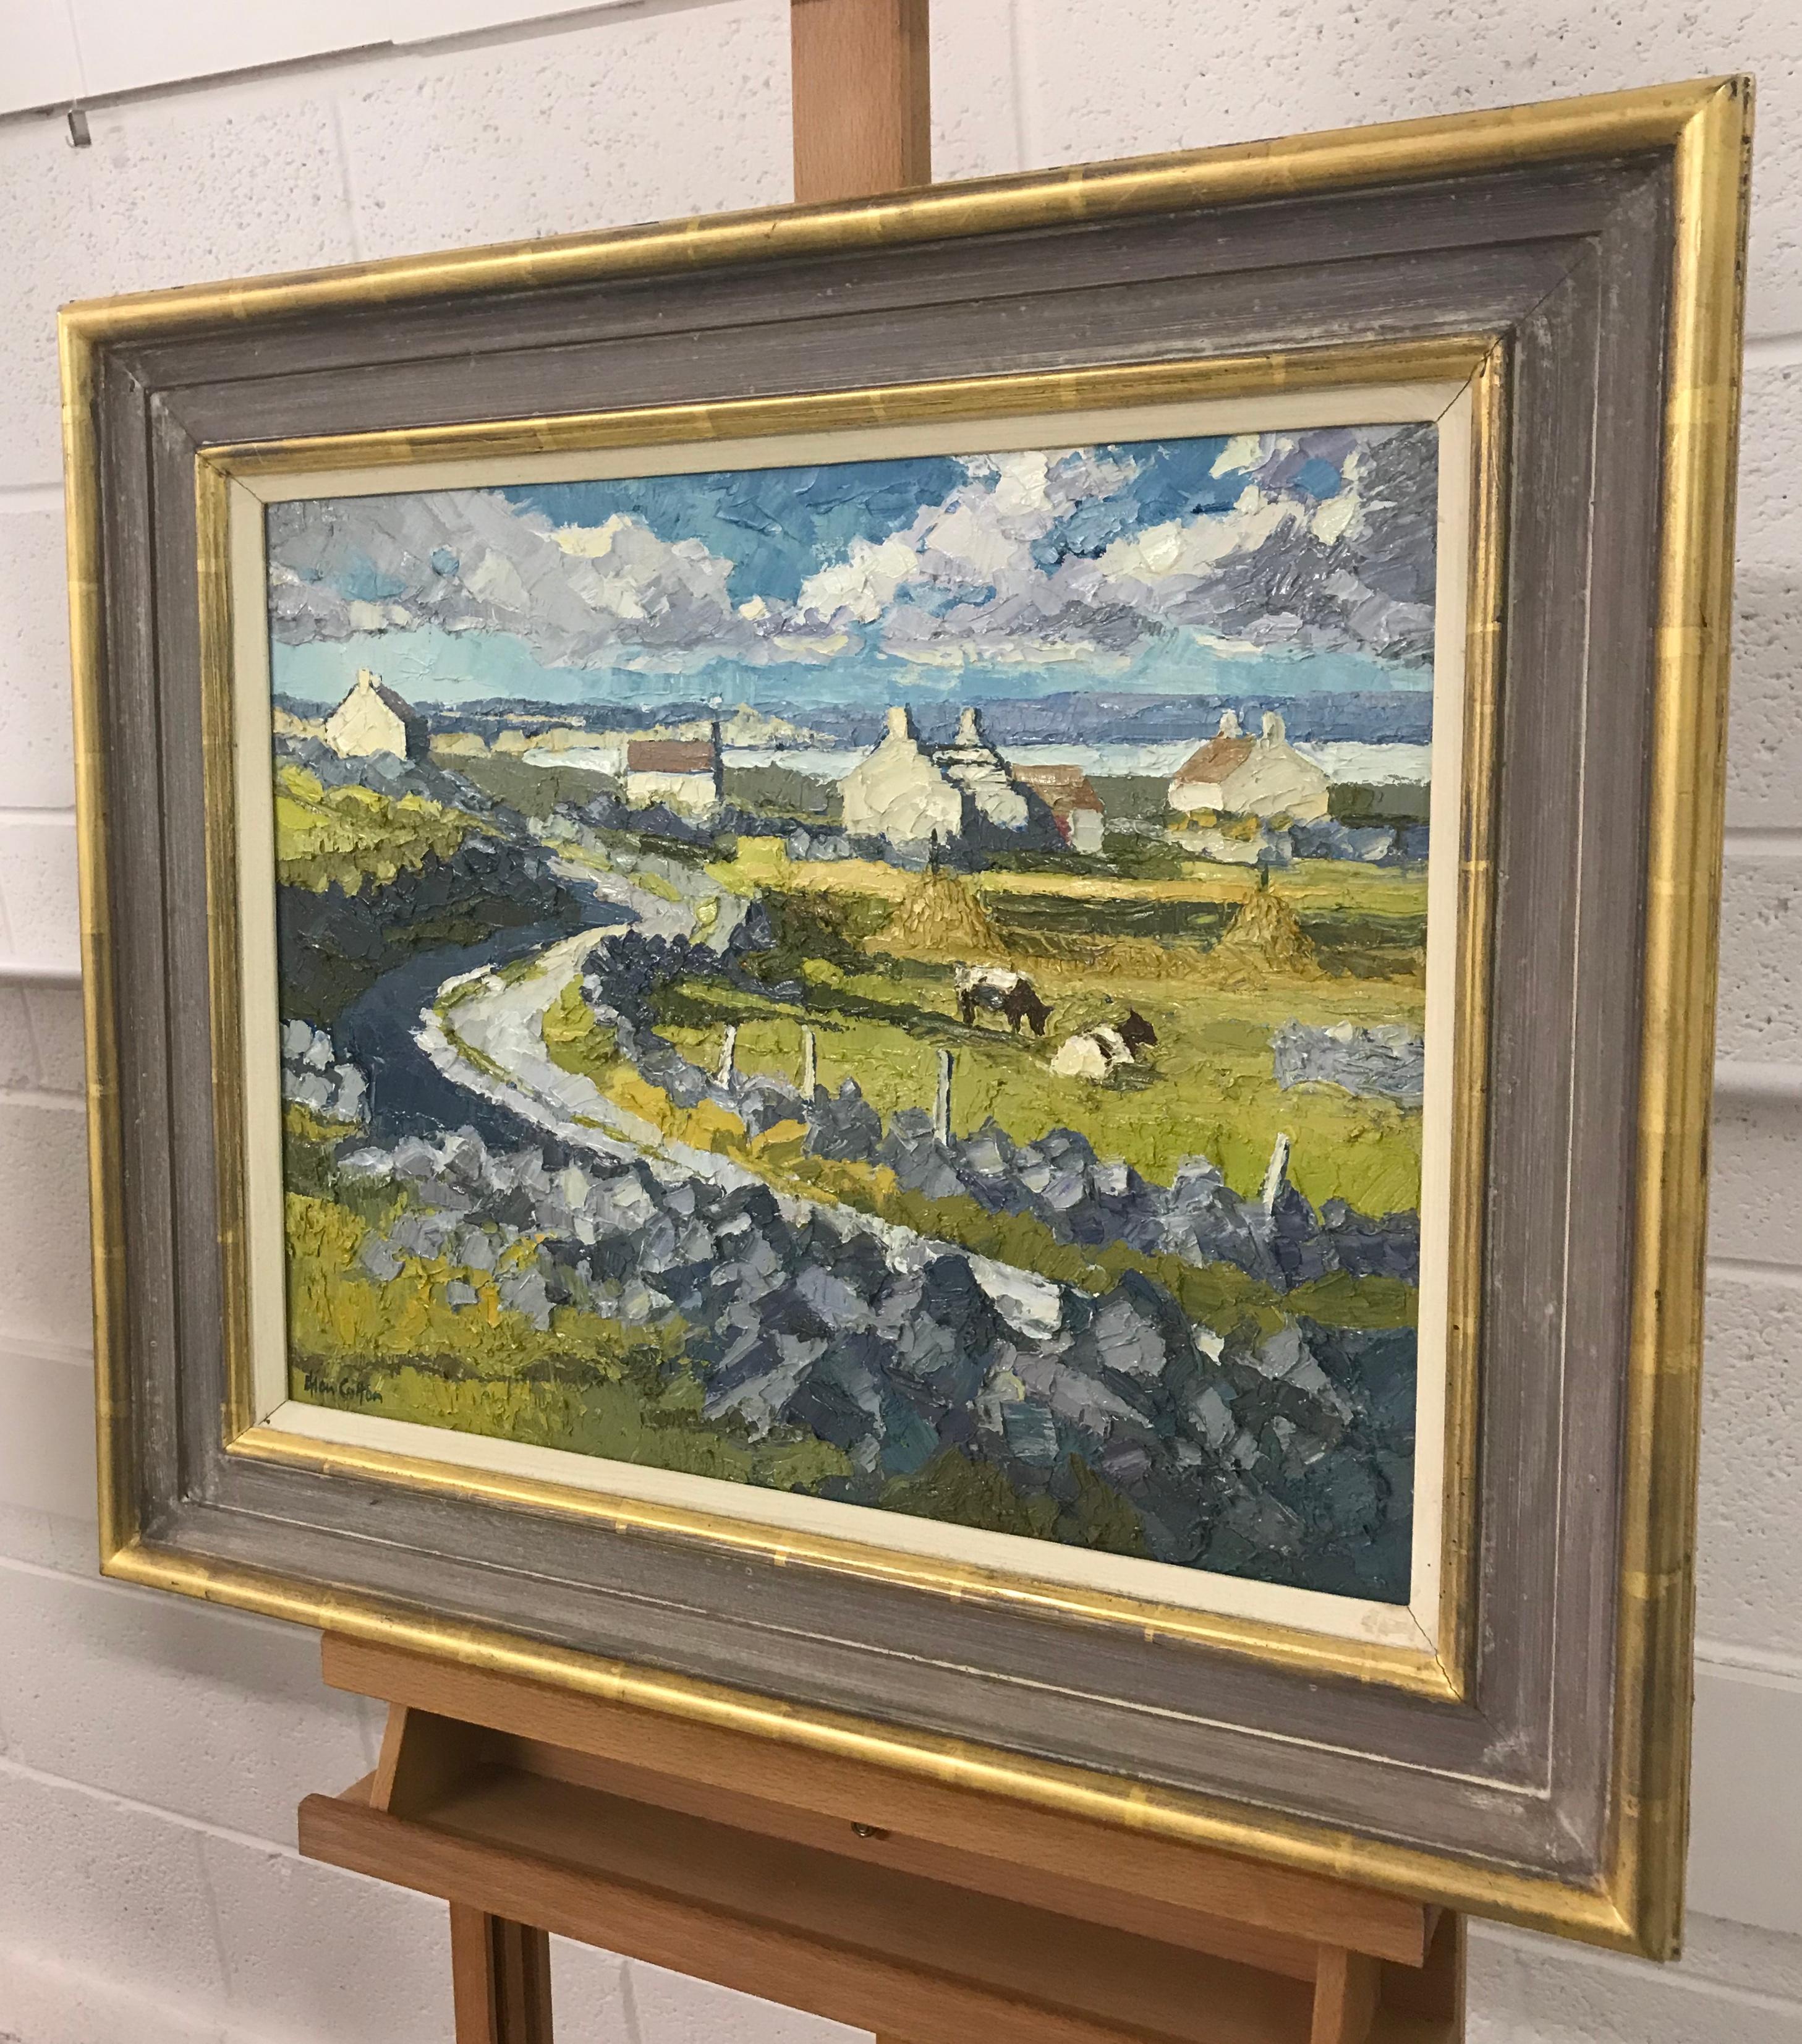 Impasto Oil Painting by Royal British Artist Alan Cotton of Connemara, ‘The Road Round the Bay’, Ireland. Unique Original, Oil on Canvas. Signed on the lower left, presented in the original frame and titled on the reverse. Alan Cotton (born 1938) is